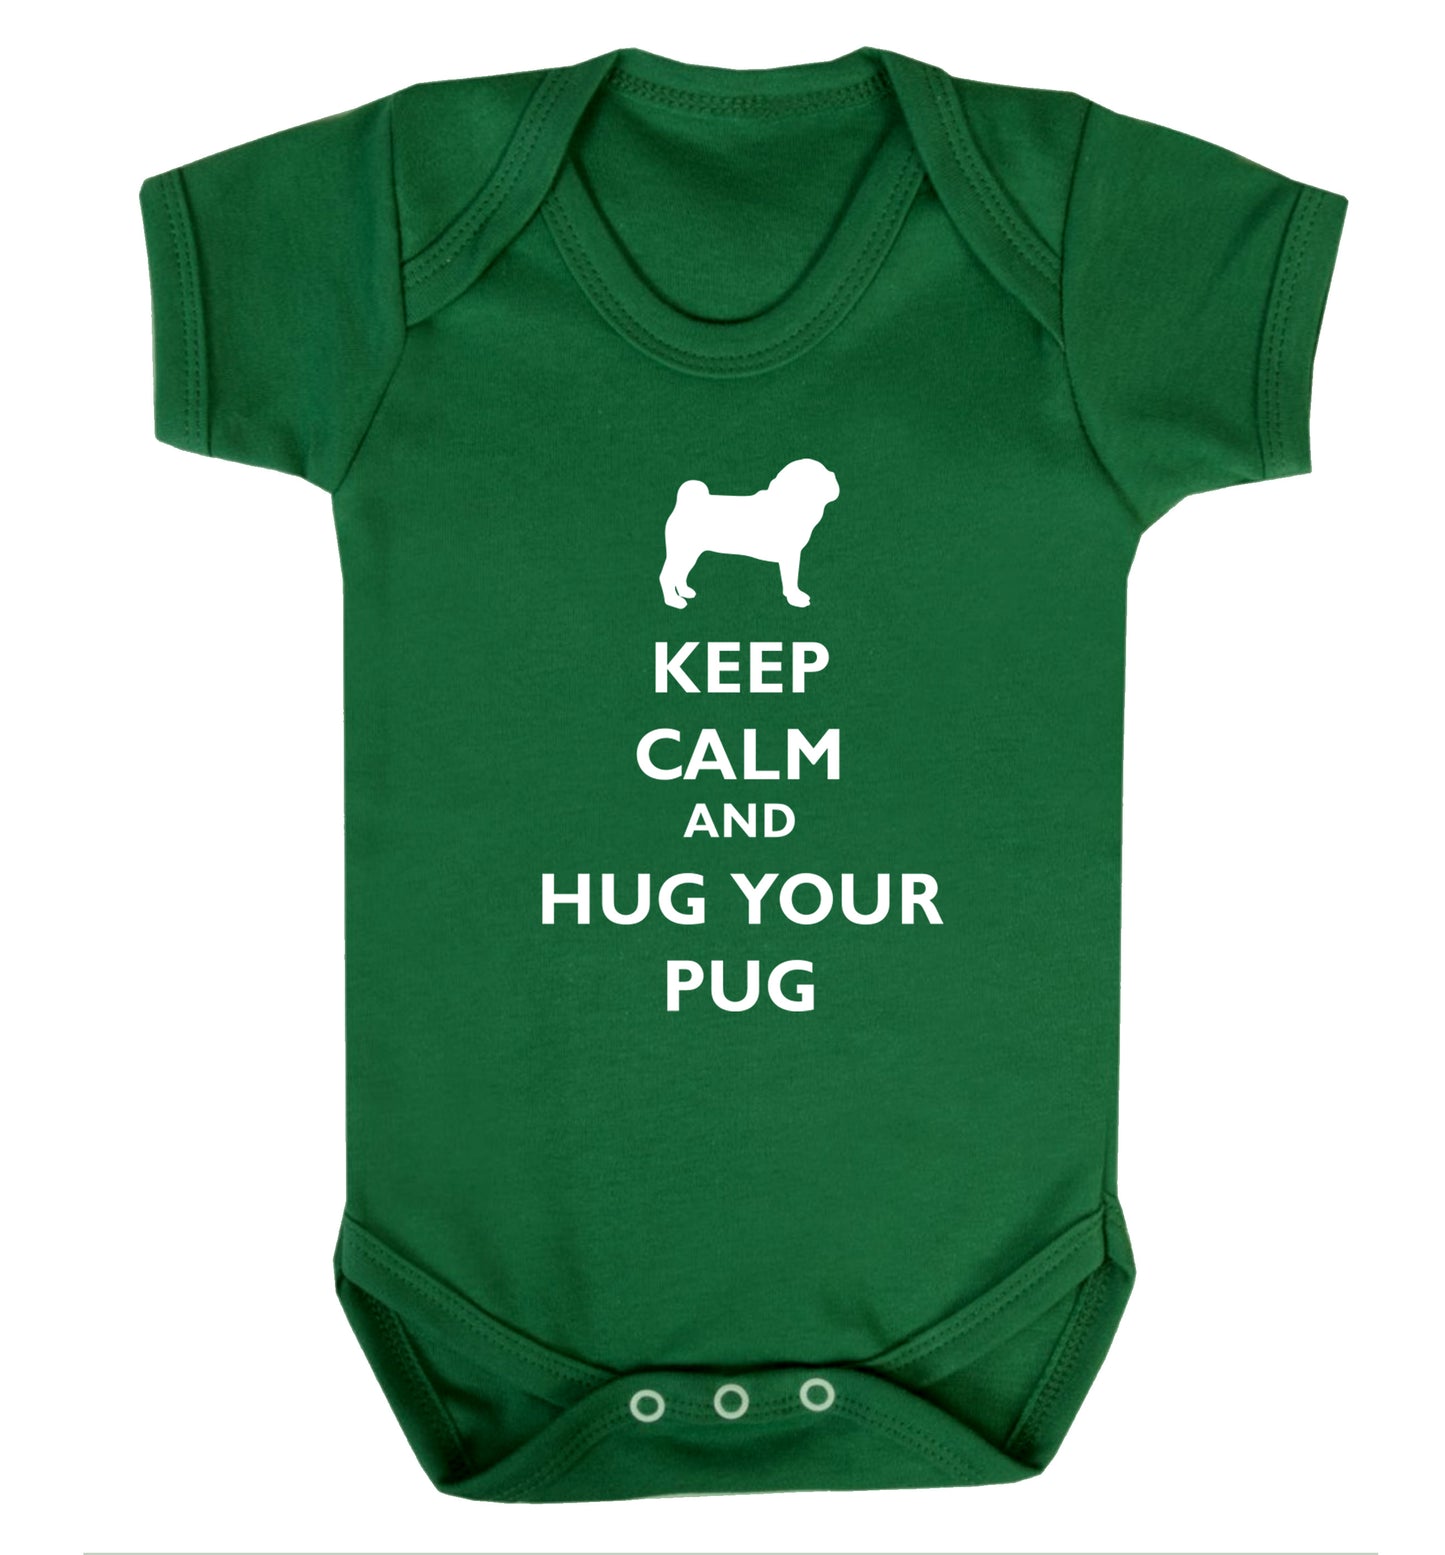 Keep calm and hug your pug Baby Vest green 18-24 months